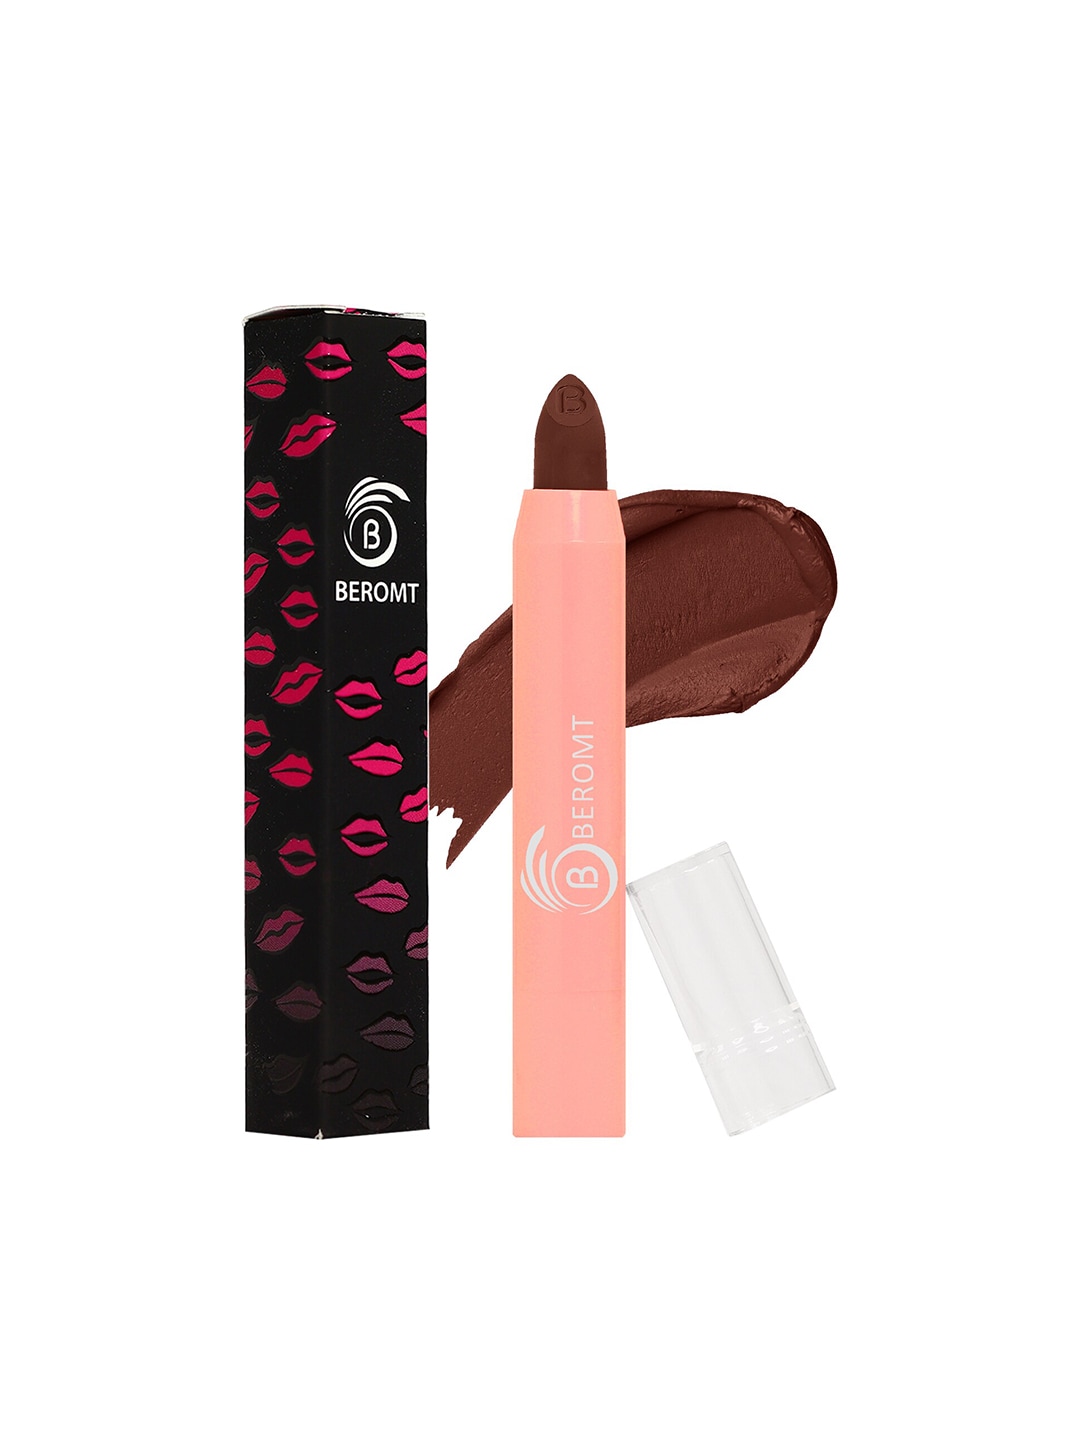 BEROMT Smudge Proof Perfect Pout Long-Lasting Matte Lip Crayon - Dont Bluff BLC01 Price in India